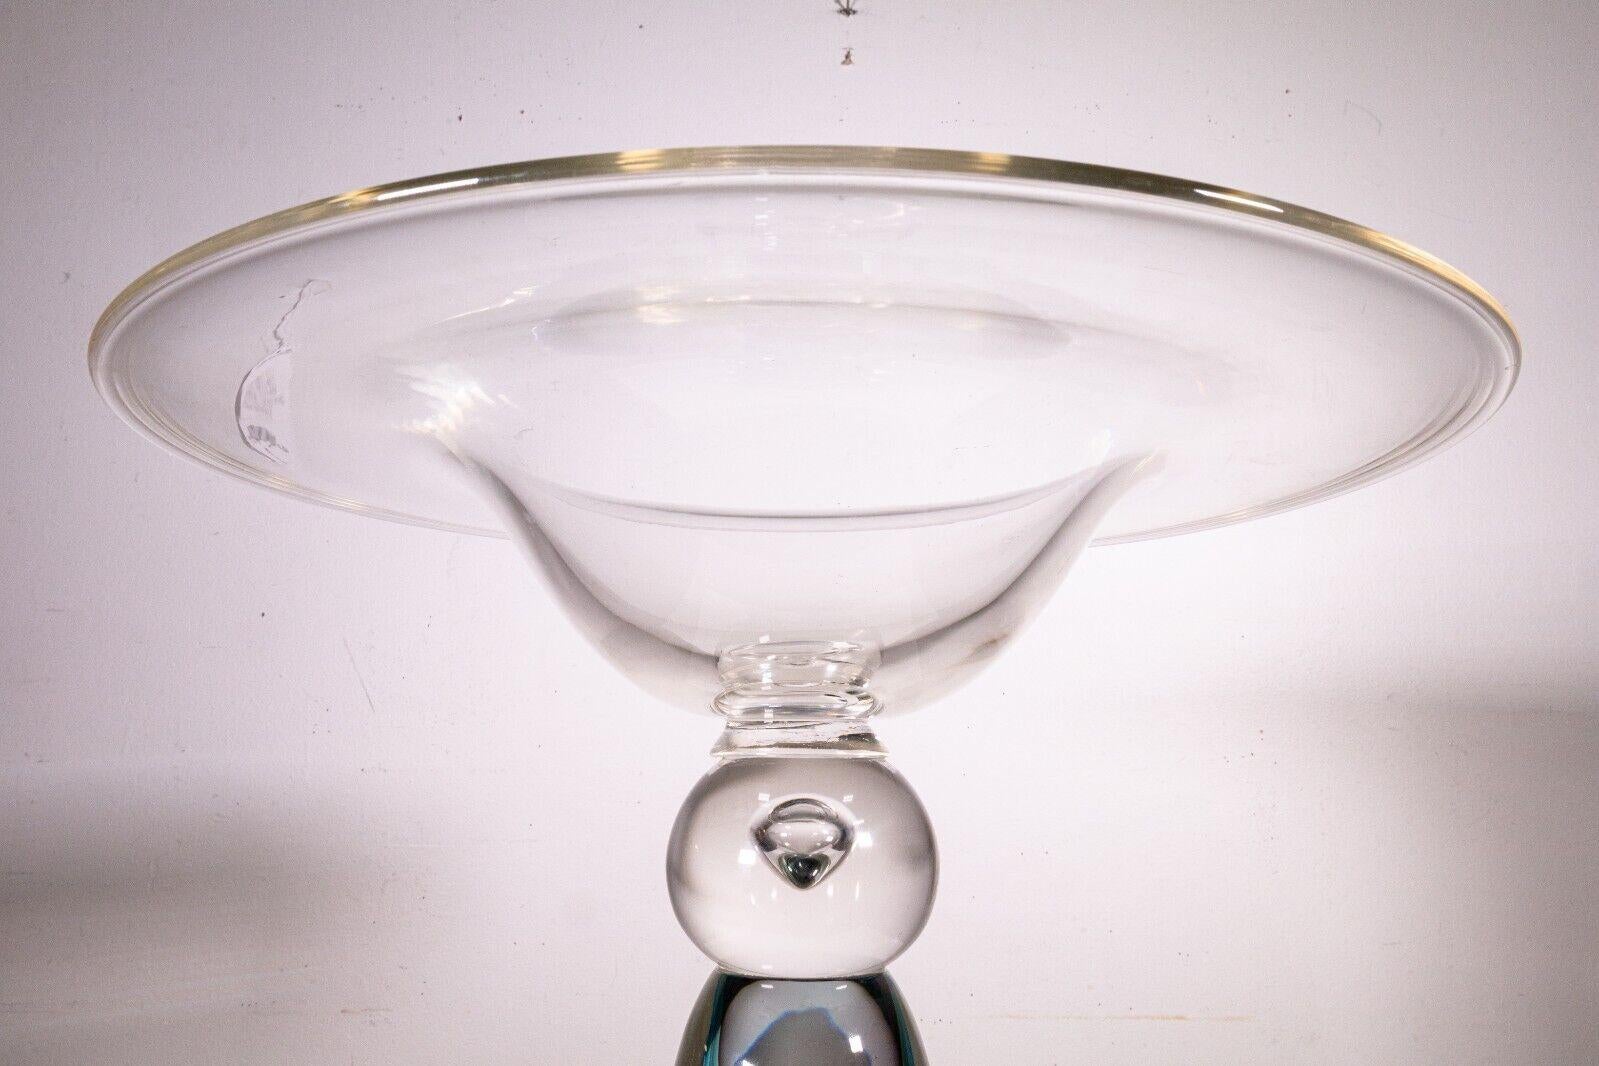 A Luigi Mellara large glass bowl centerpiece. This wonderful glass sculpture centerpiece bowl features a mix of clear glass and colored blue glass detailing. This piece stands very elegantly and looks lovely as a centerpiece. It is hand signed on